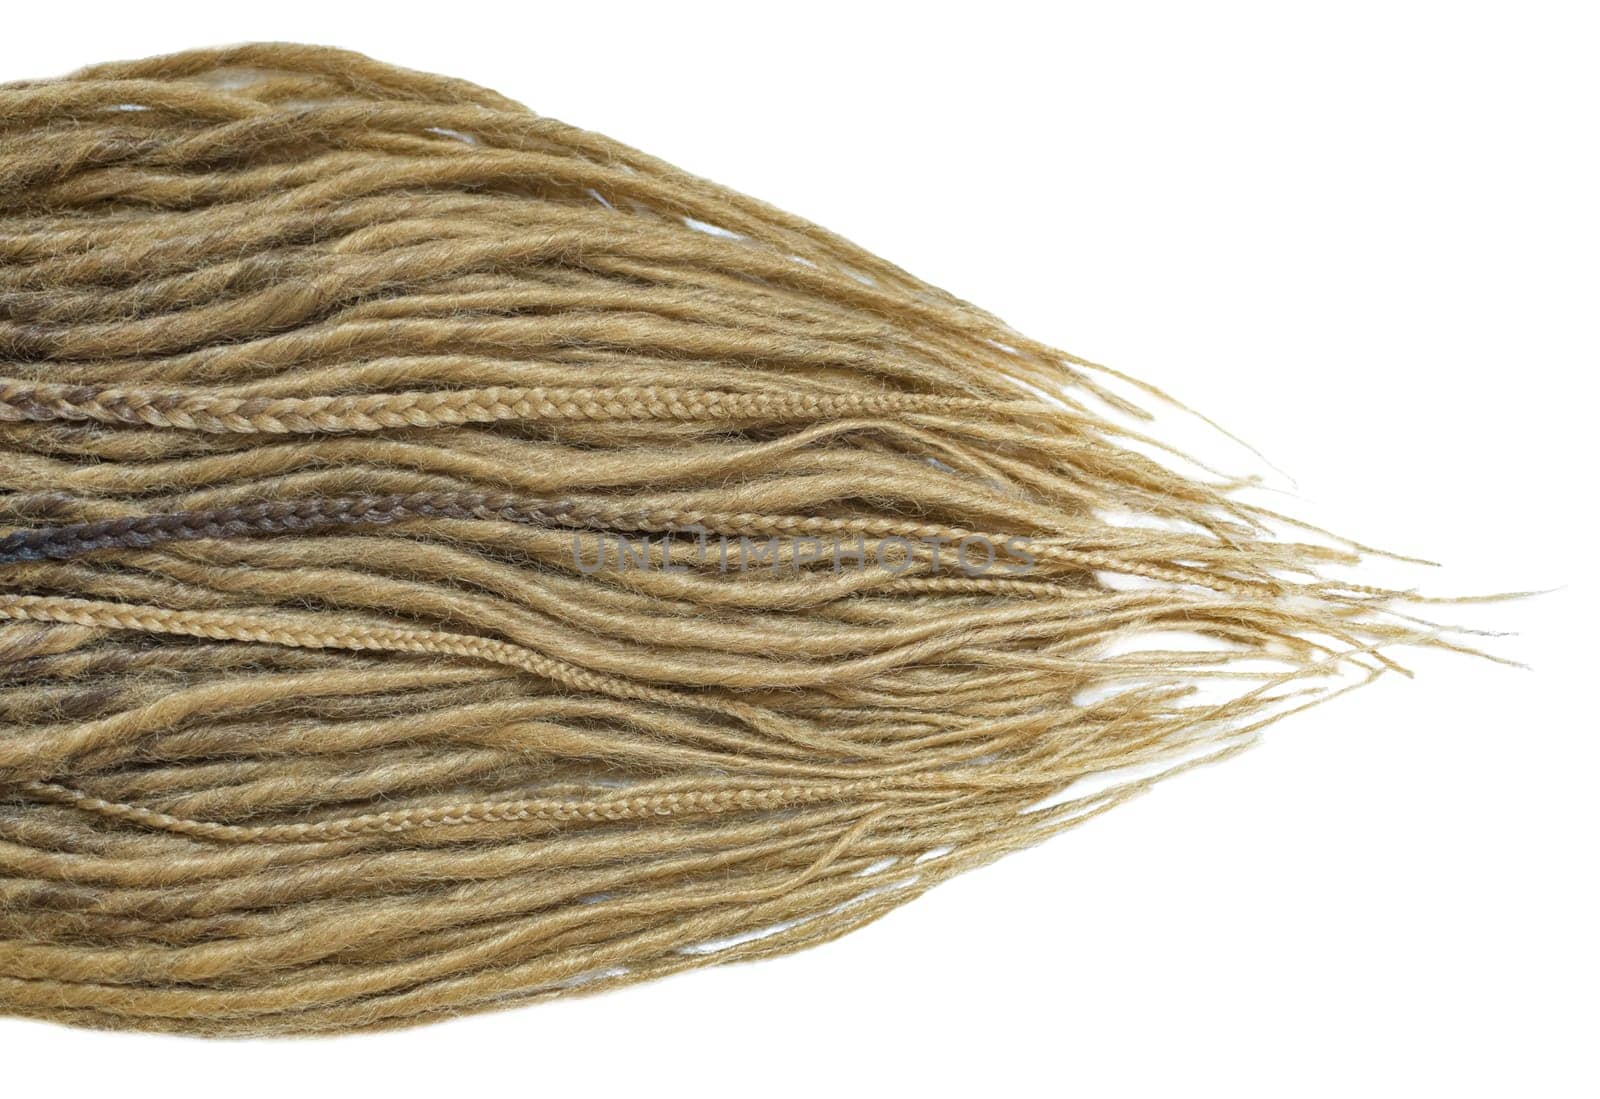 Dreadlocks are laid out on a white background and taper to the ends. Arrow from the hair. Blonde braids on a white background at close range.